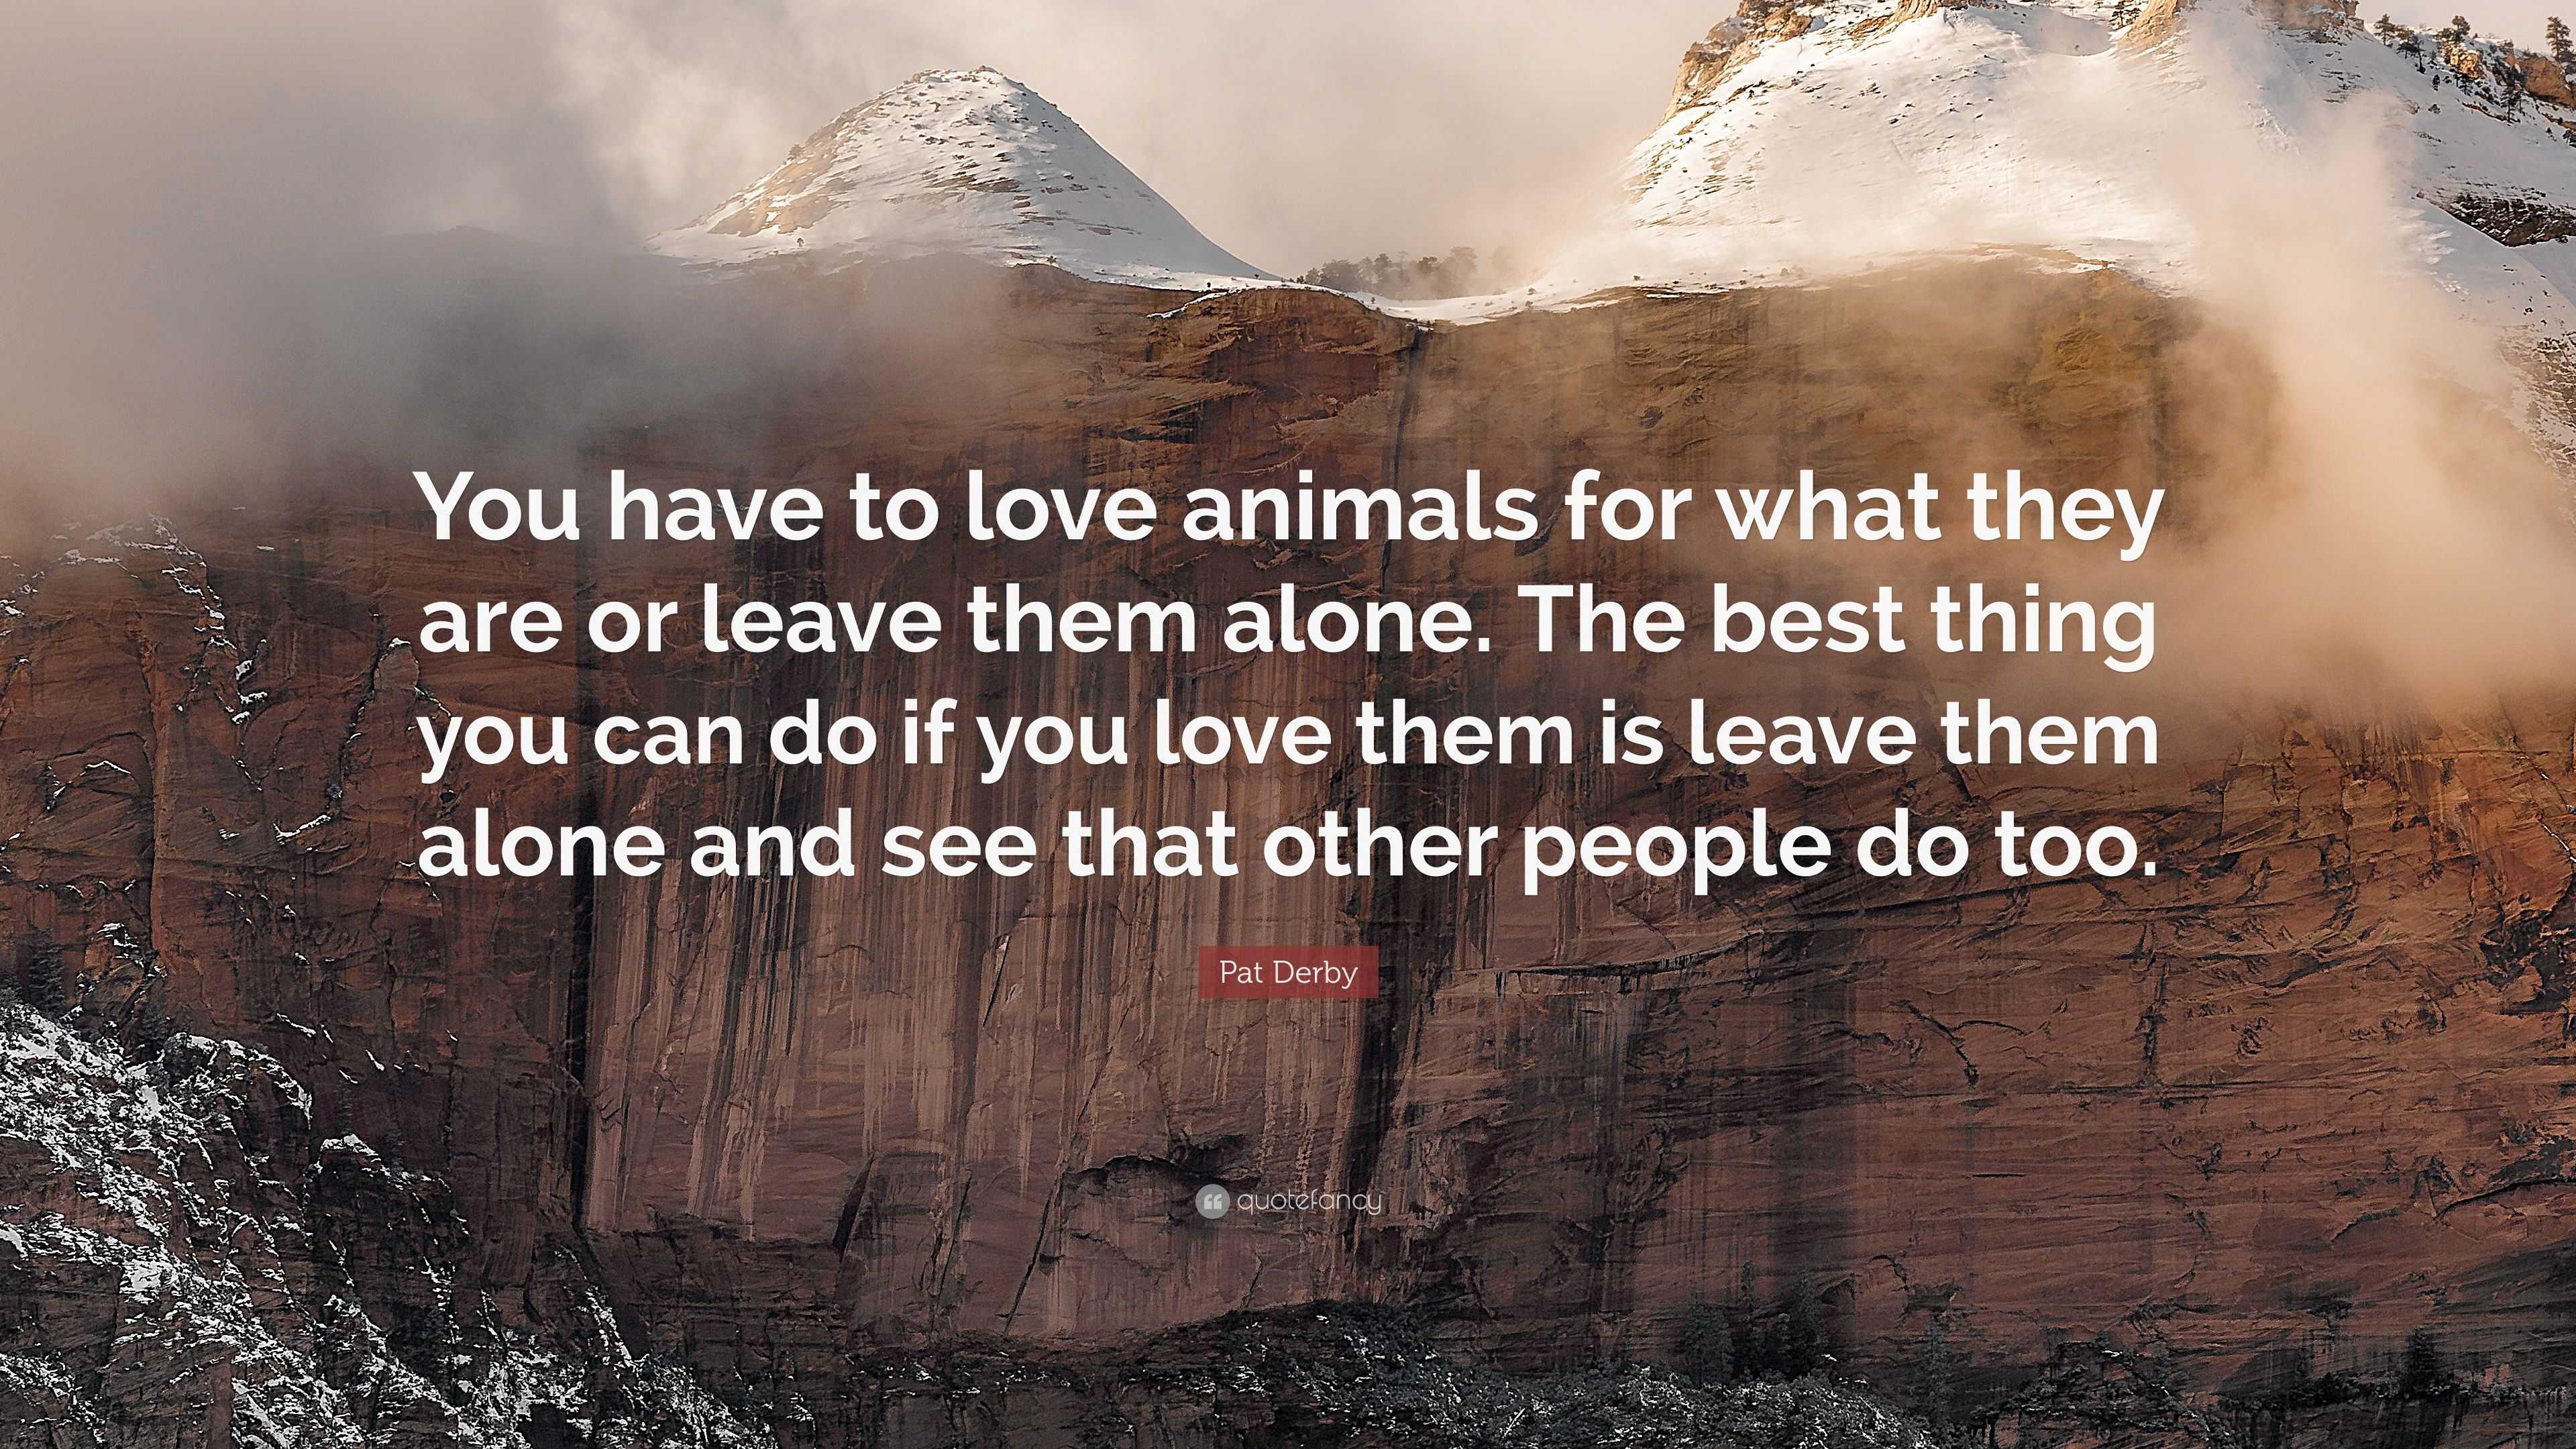 Pat Derby Quote: “You have to love animals for what they are or leave them  alone. The best thing you can do if you love them is leave them...”